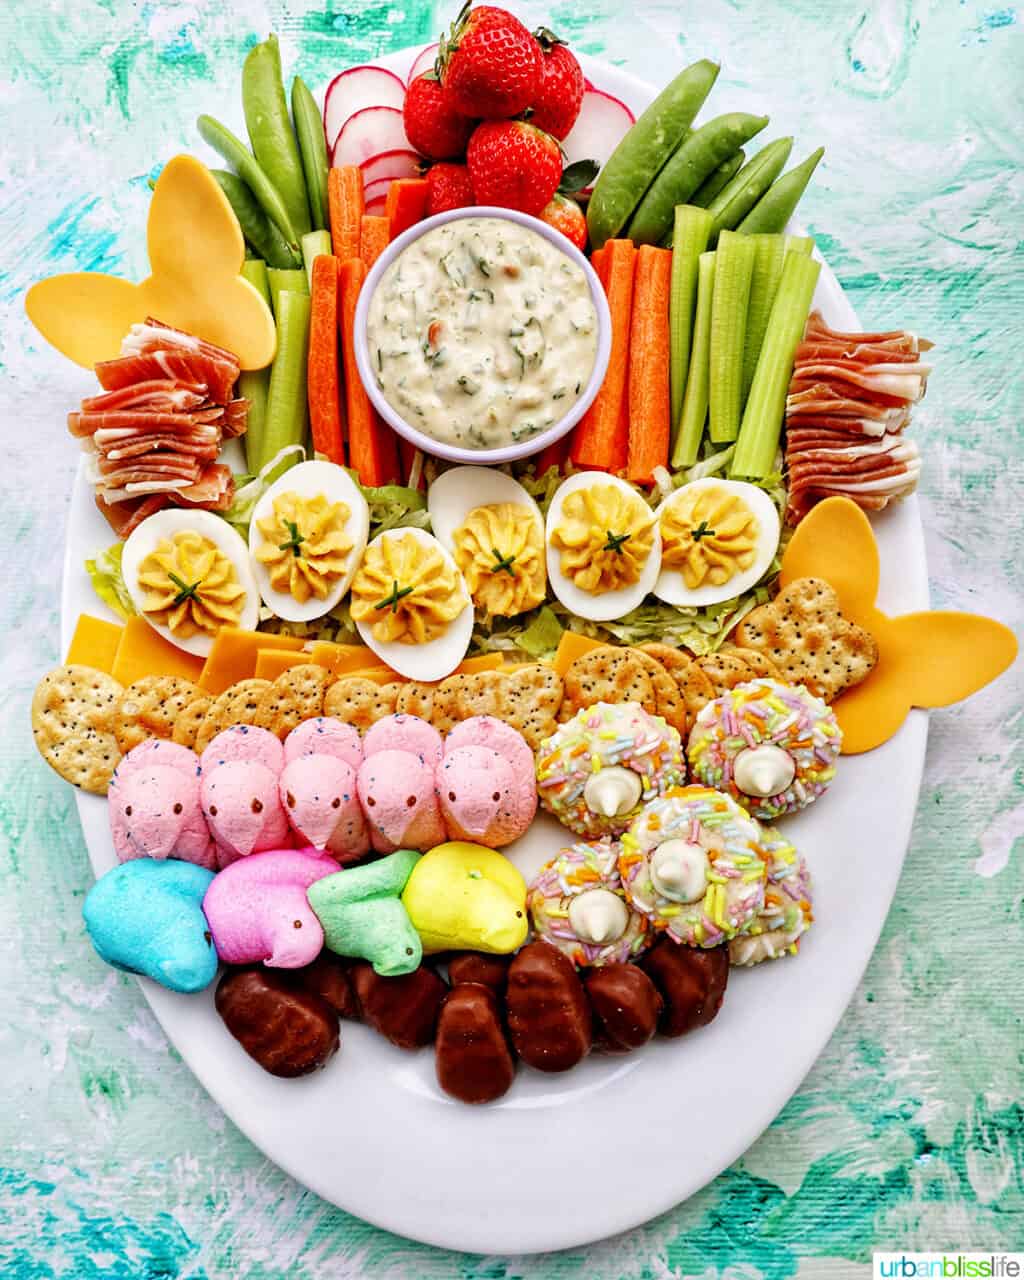 Peeps, chocolate Easter candies, crackers, and deviled eggs on shredded lettuce next to sliced vegetables and a bowl of vegetable dip on a large white platter.